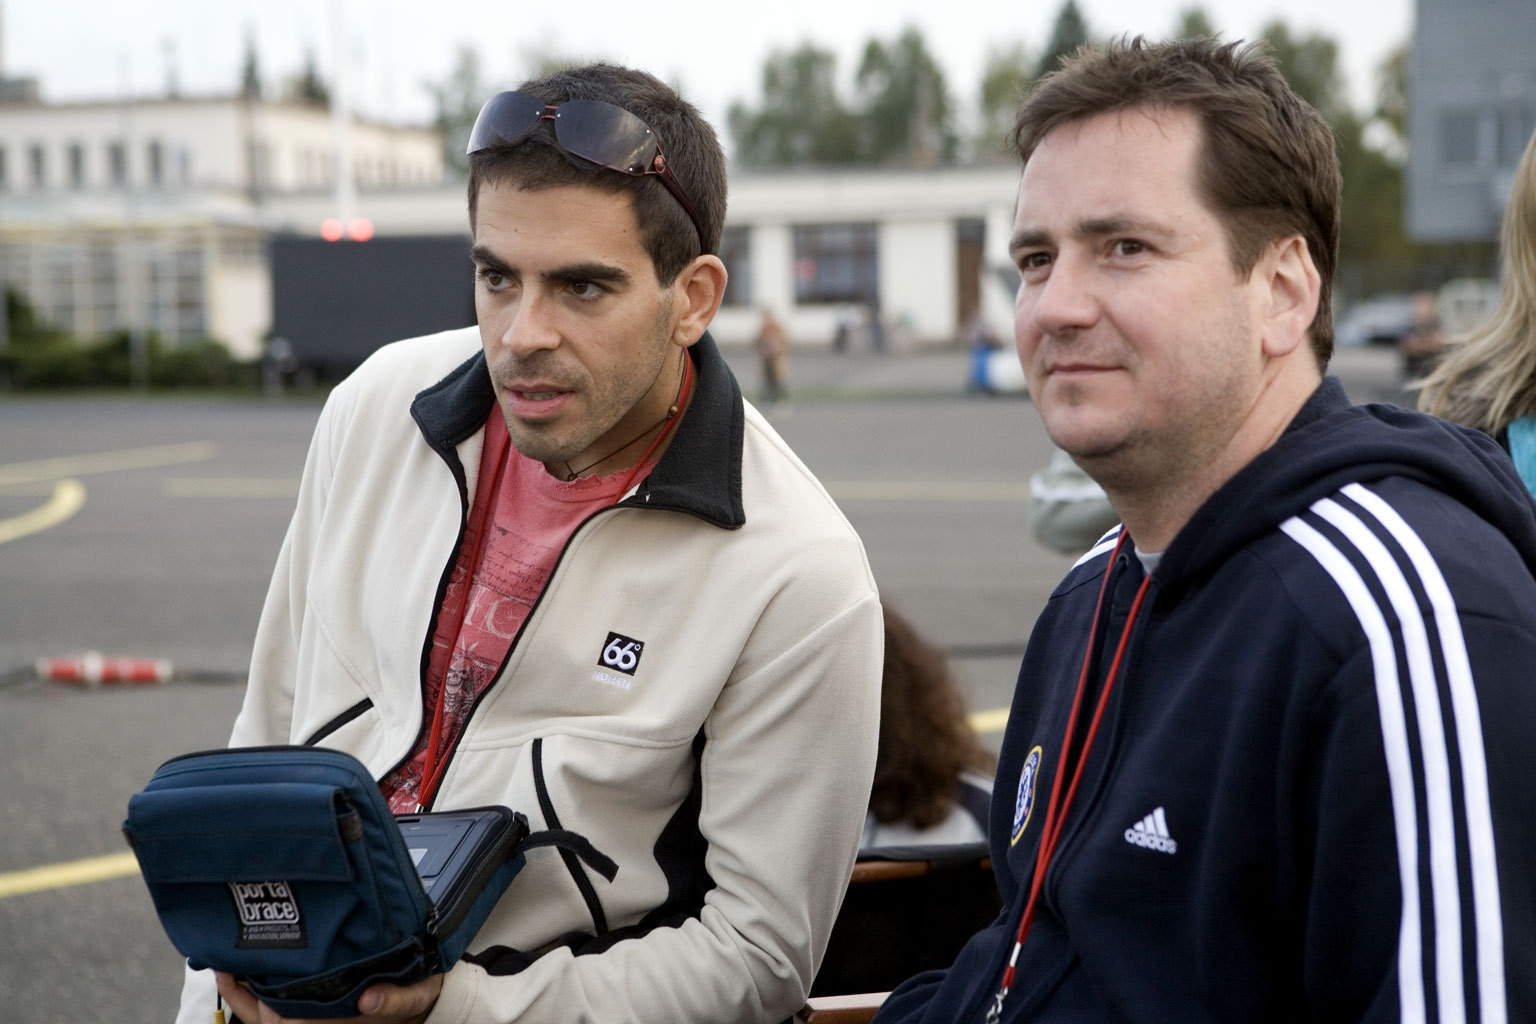 Director Eli Roth and Producer Philip Waley on set of Hostel Part II